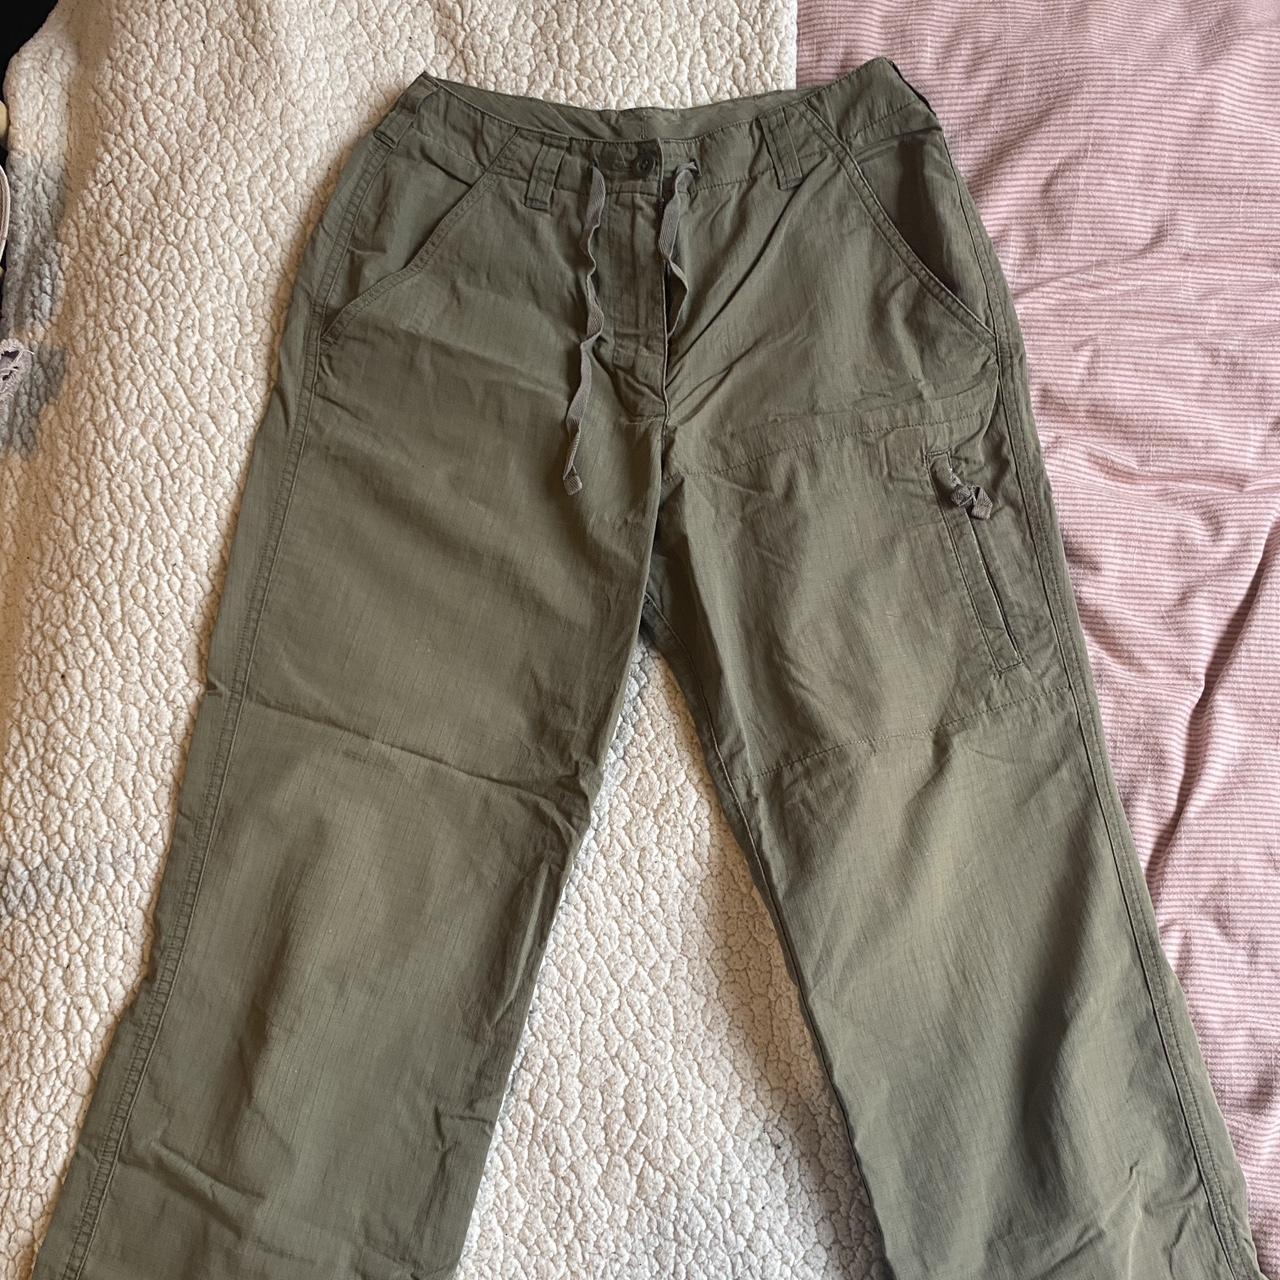 Khaki cargo trousers with zipper detailing on... - Depop